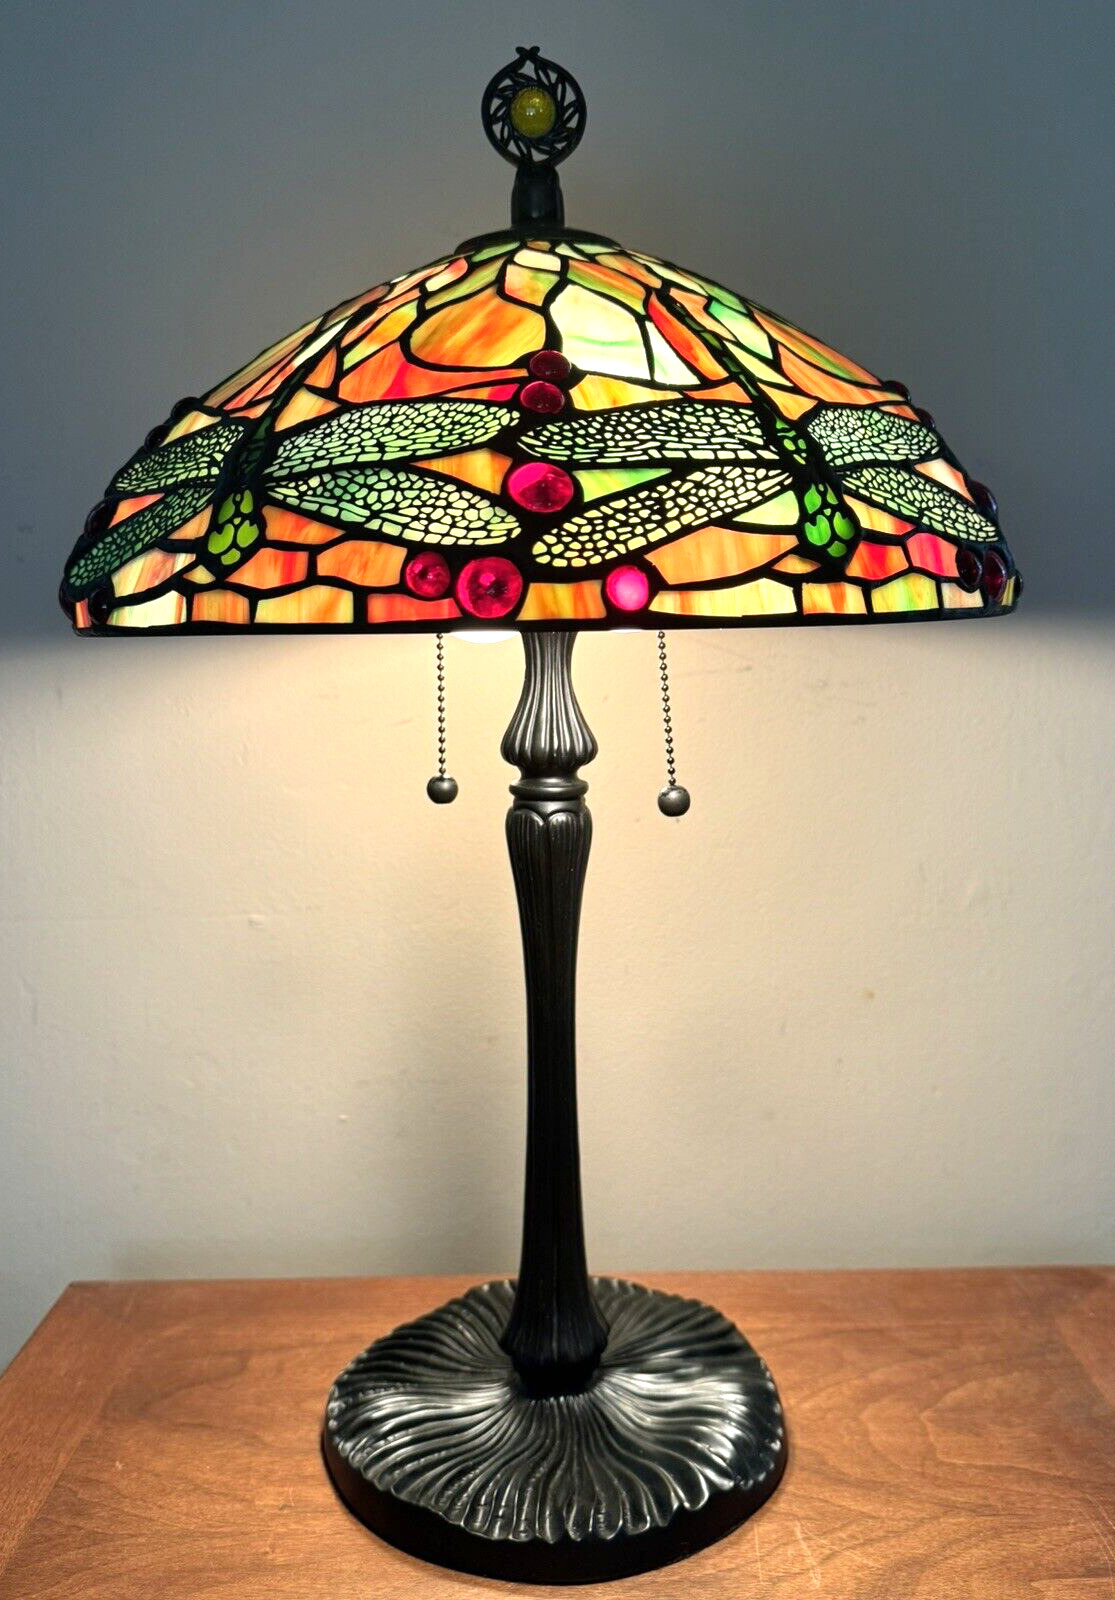 STUNNING Quoizel TIFFANY Style Stained Glass DRAGONFLY Mosaic TABLE LAMP